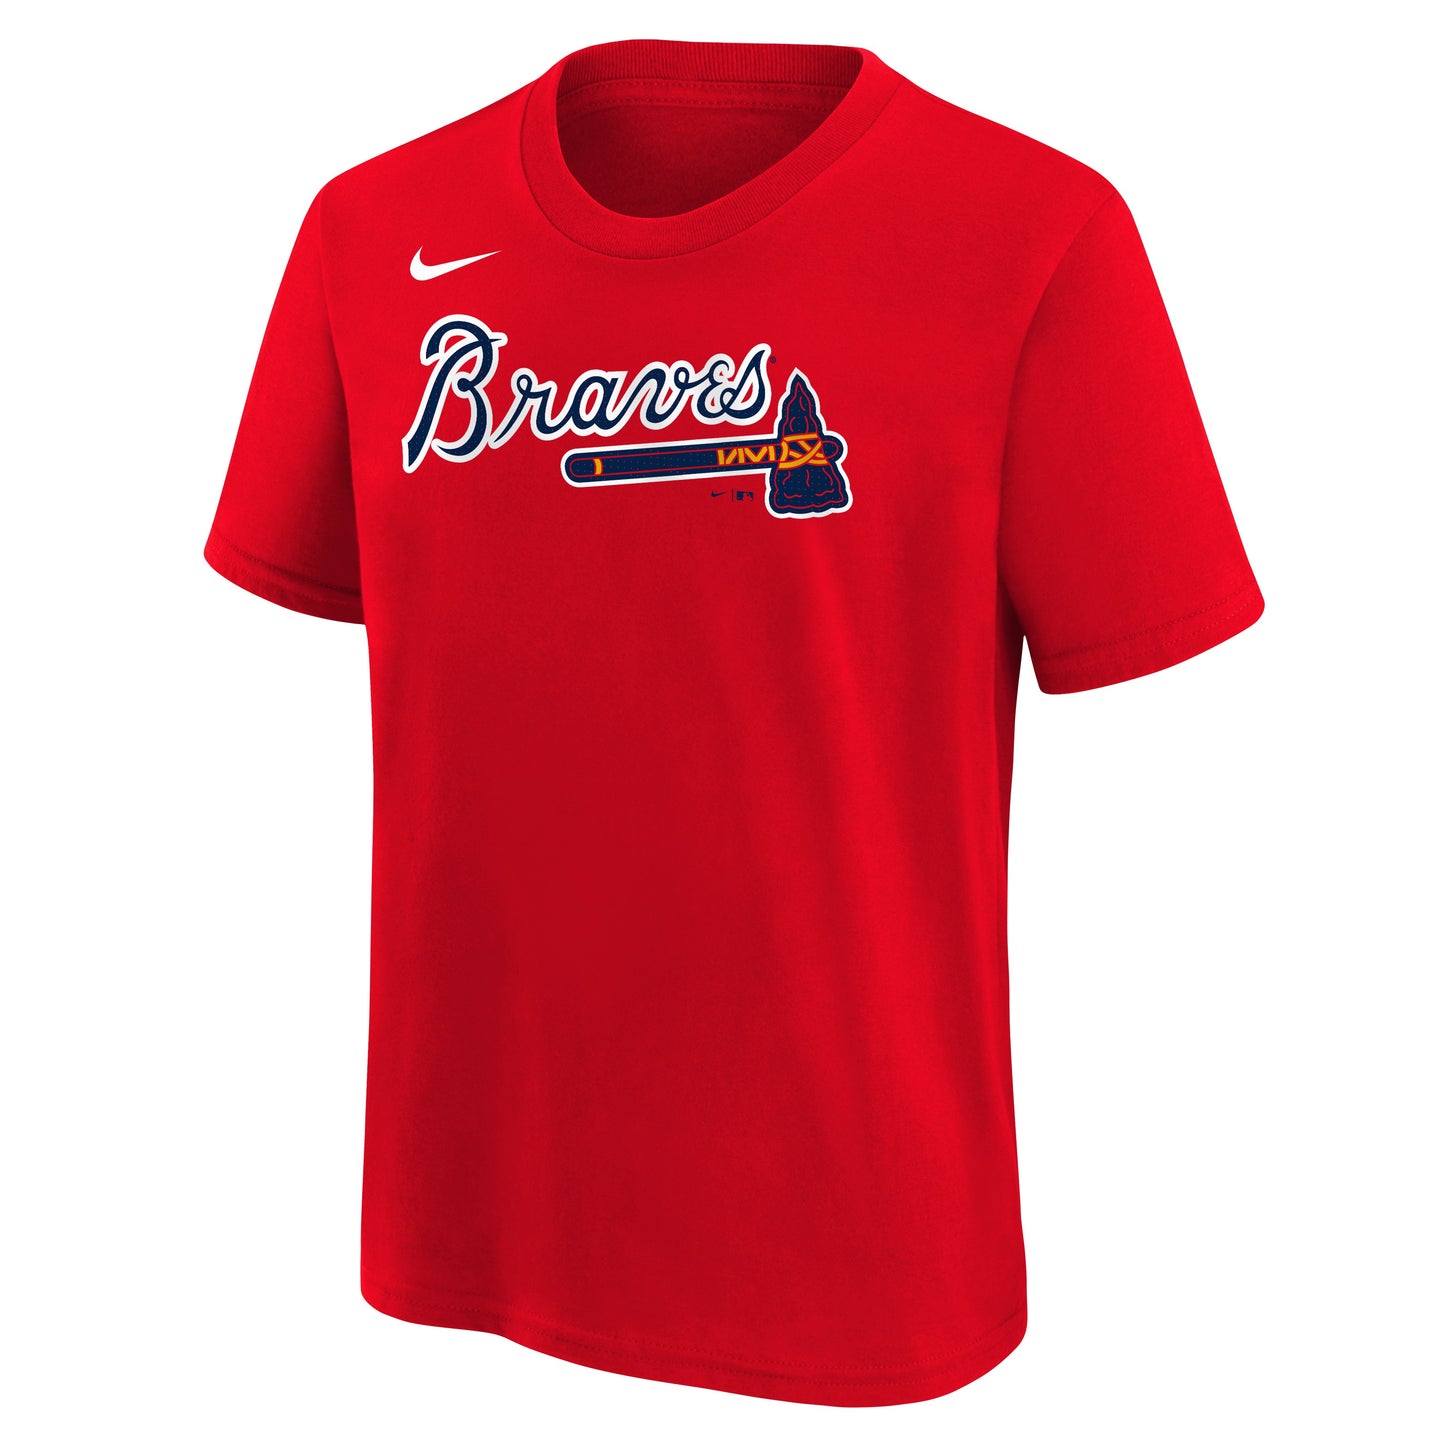 Youth Ronald Acuna Jr. Atlanta Braves Nike Red FUSE Player Name & Number T-Shirt